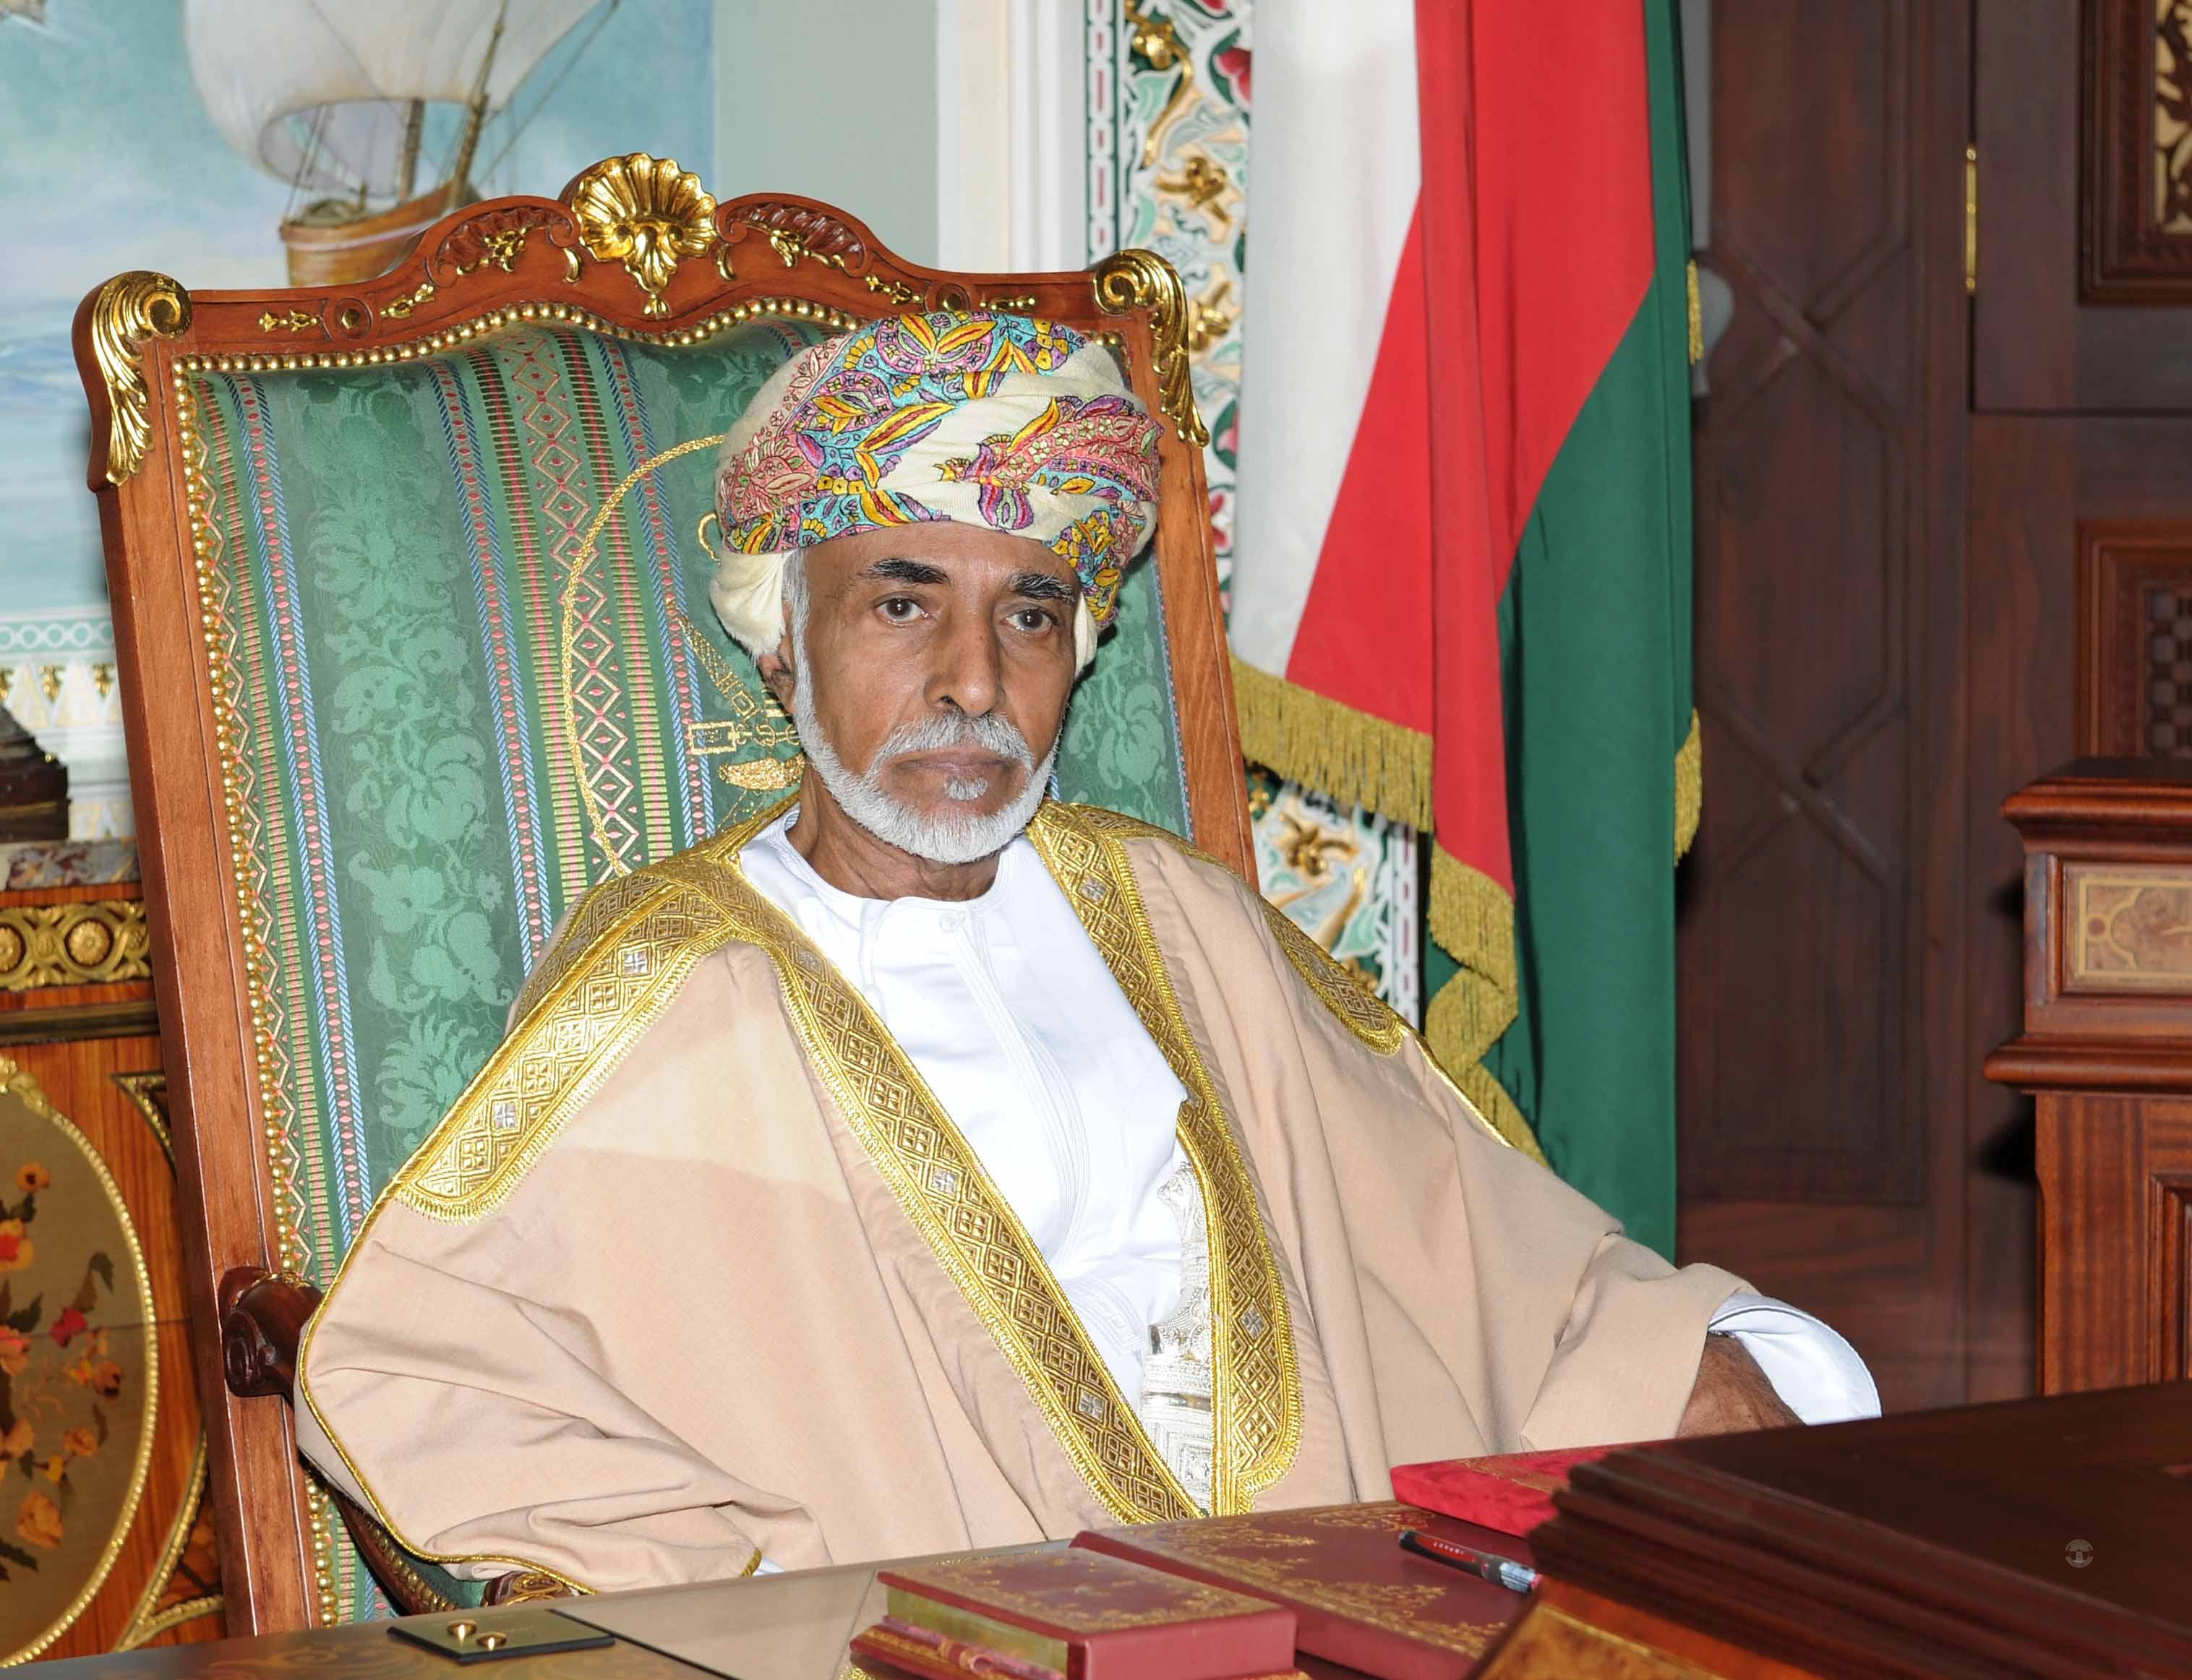 His Majesty Sultan Qaboos sends greetings to Russia, the Philippines